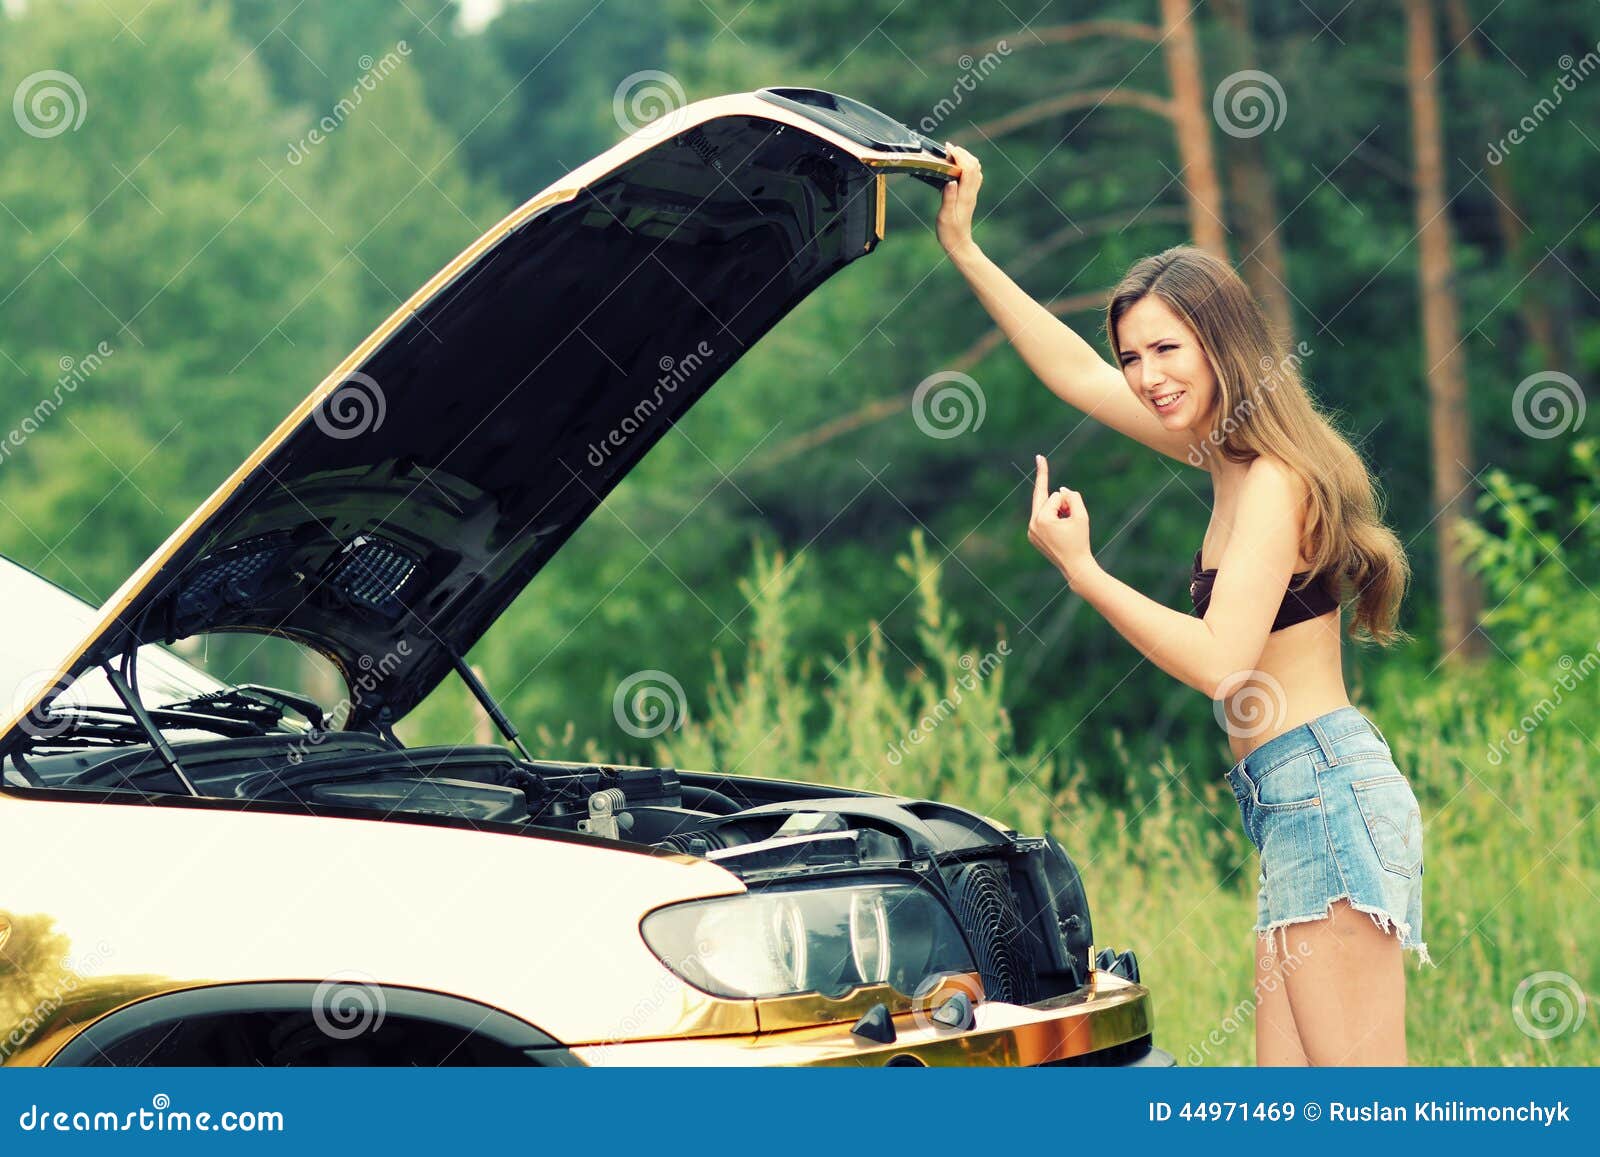 Girl In Bikini And Car Stock Image Image Of Adult Attractive 44971469